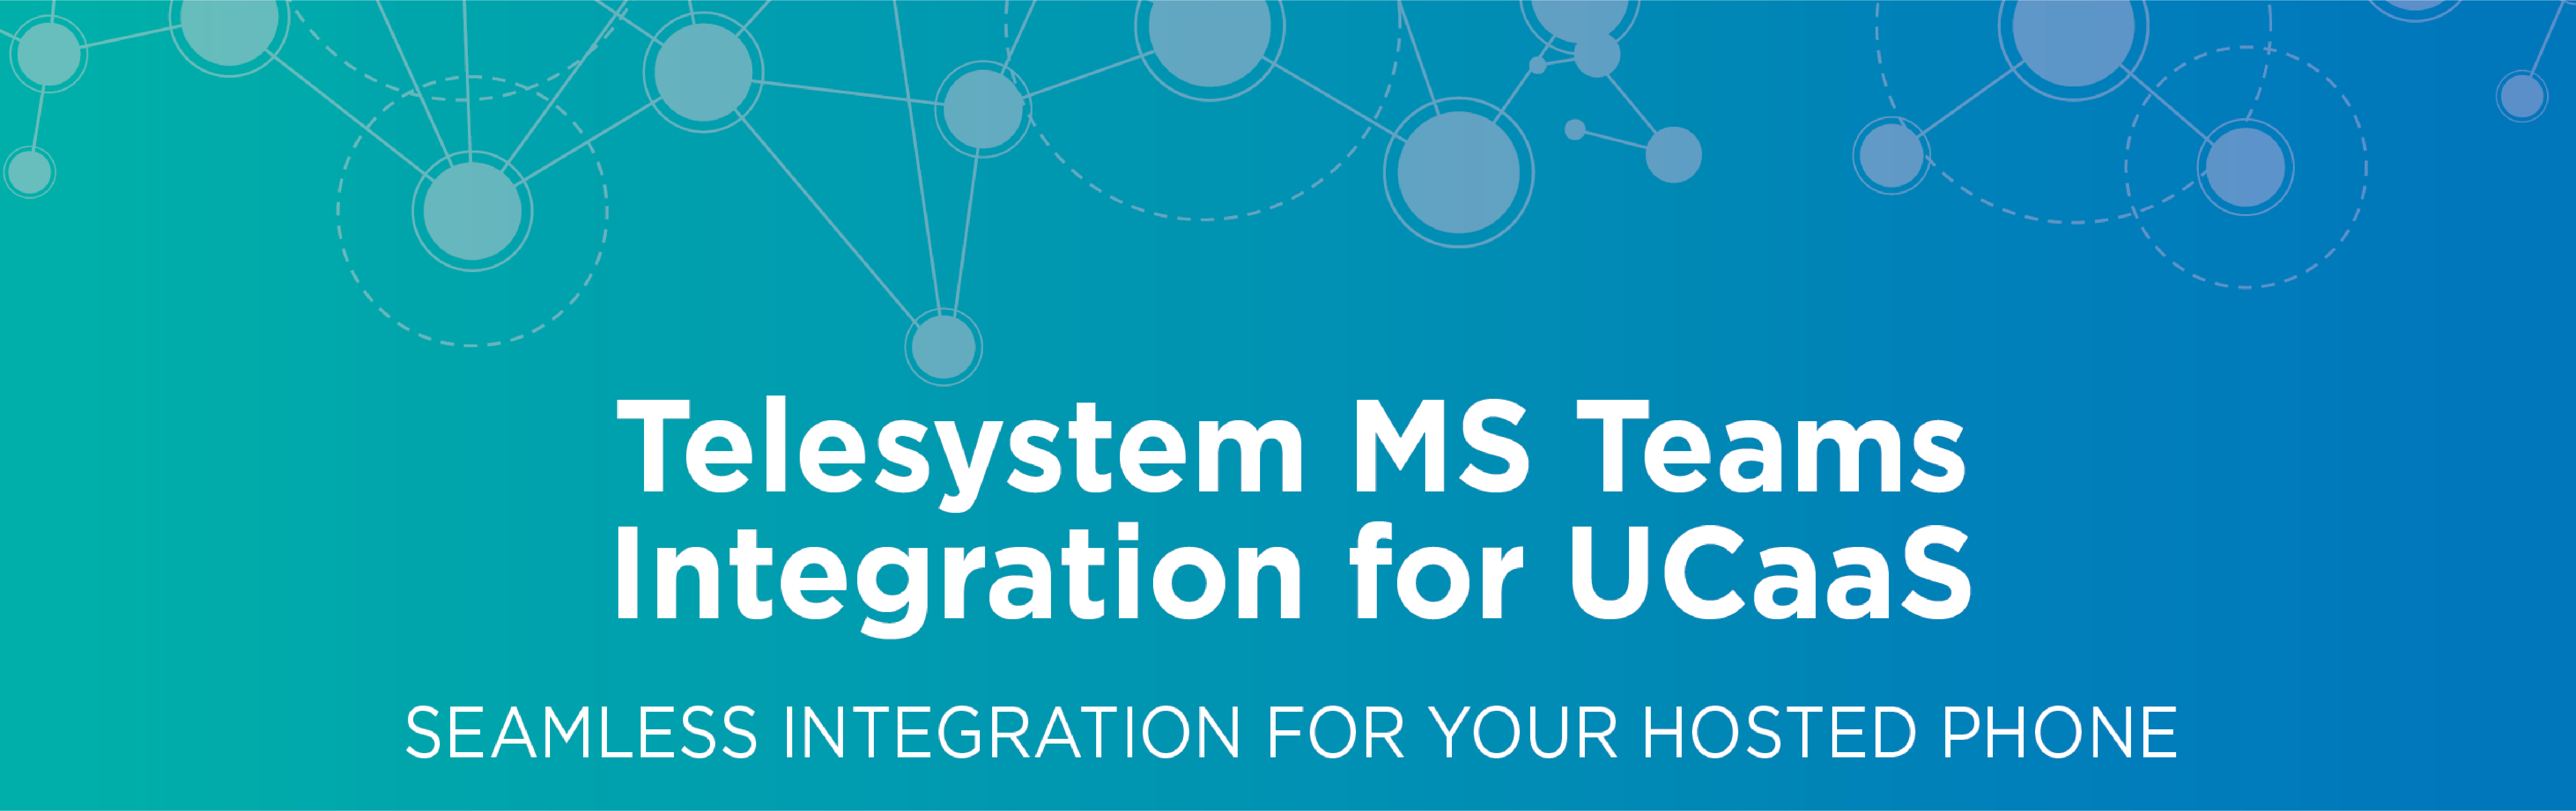 MS Teams Integration for UCaaS Overview Sheet Thumbnail